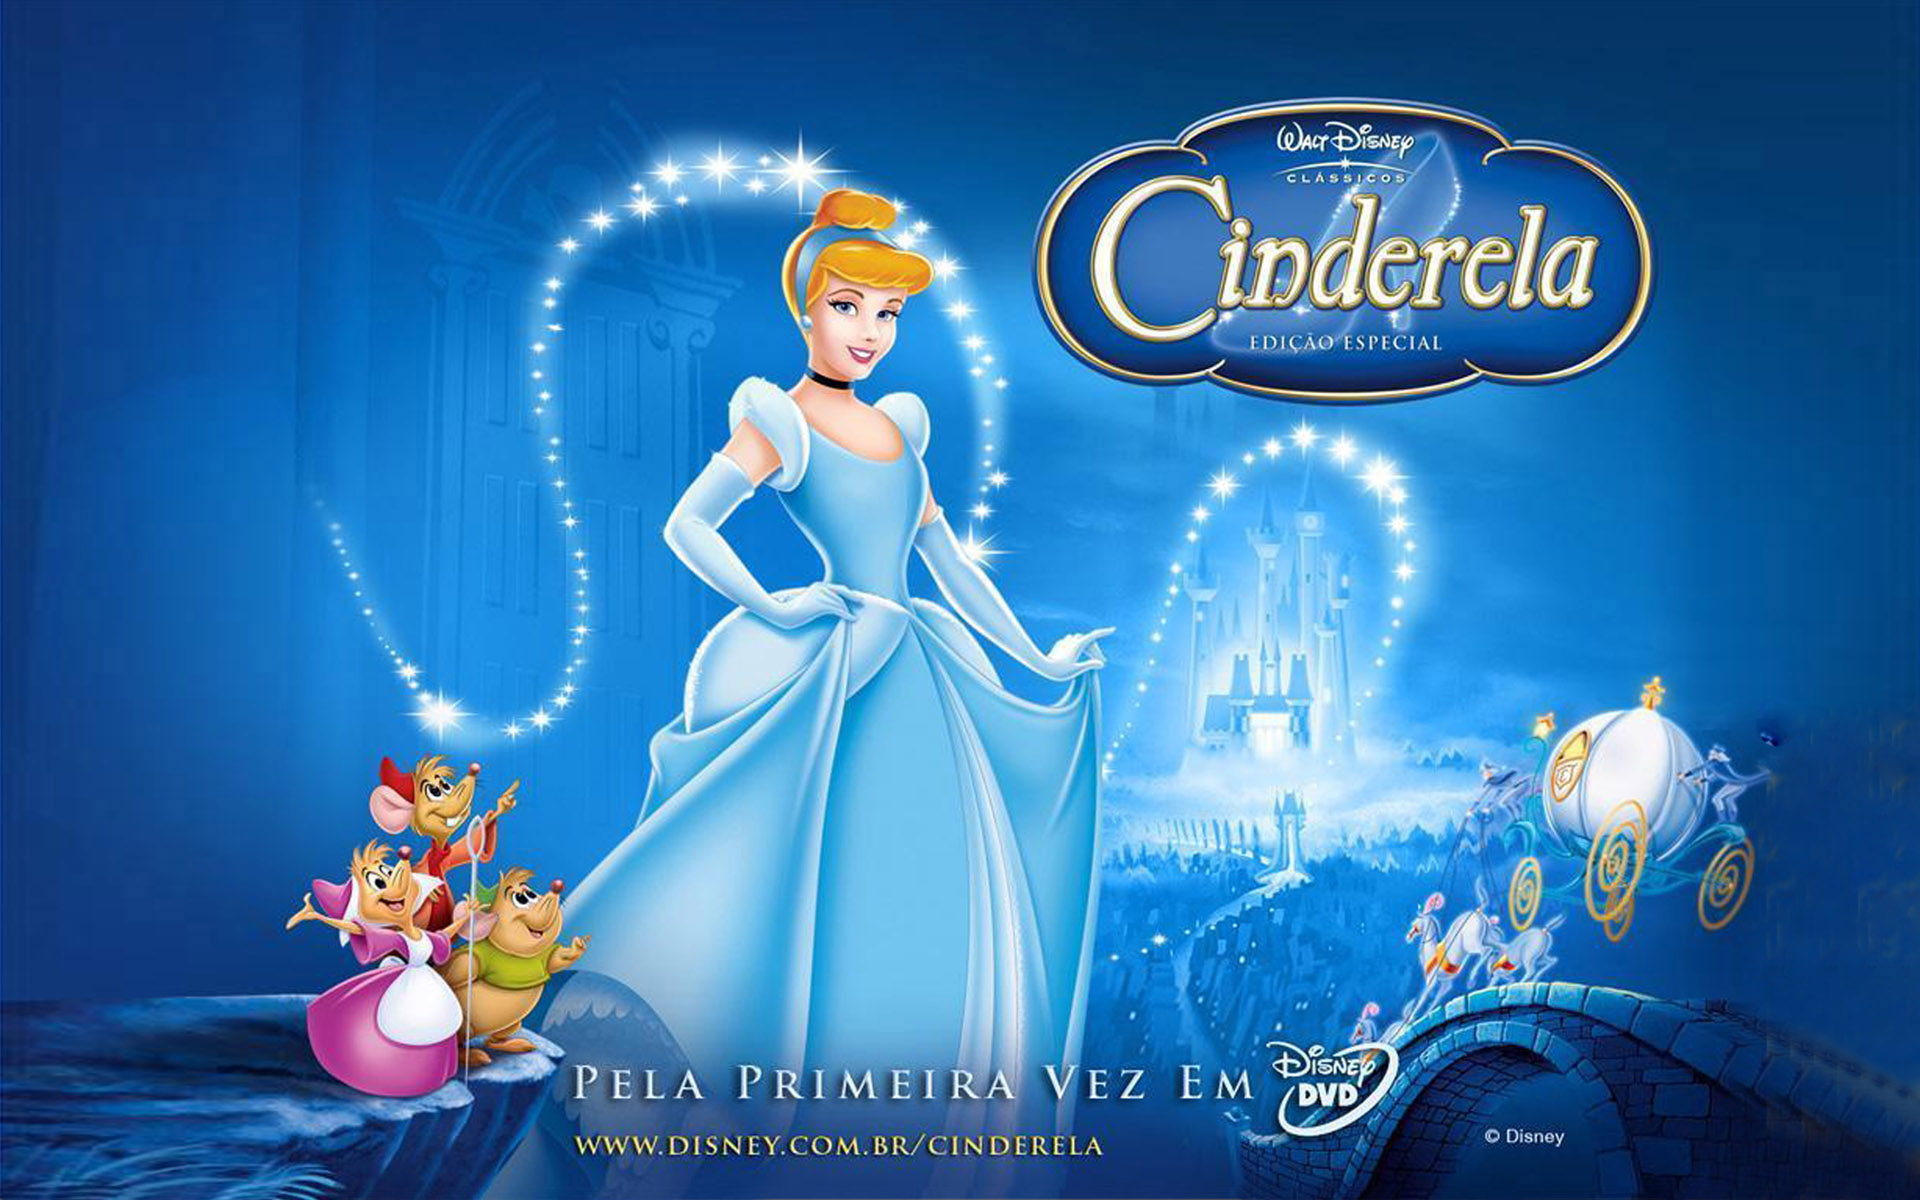 Cinderella Cartoon Wallpapers Hd For Mobile Phones And Laptops 1920x1200 :  